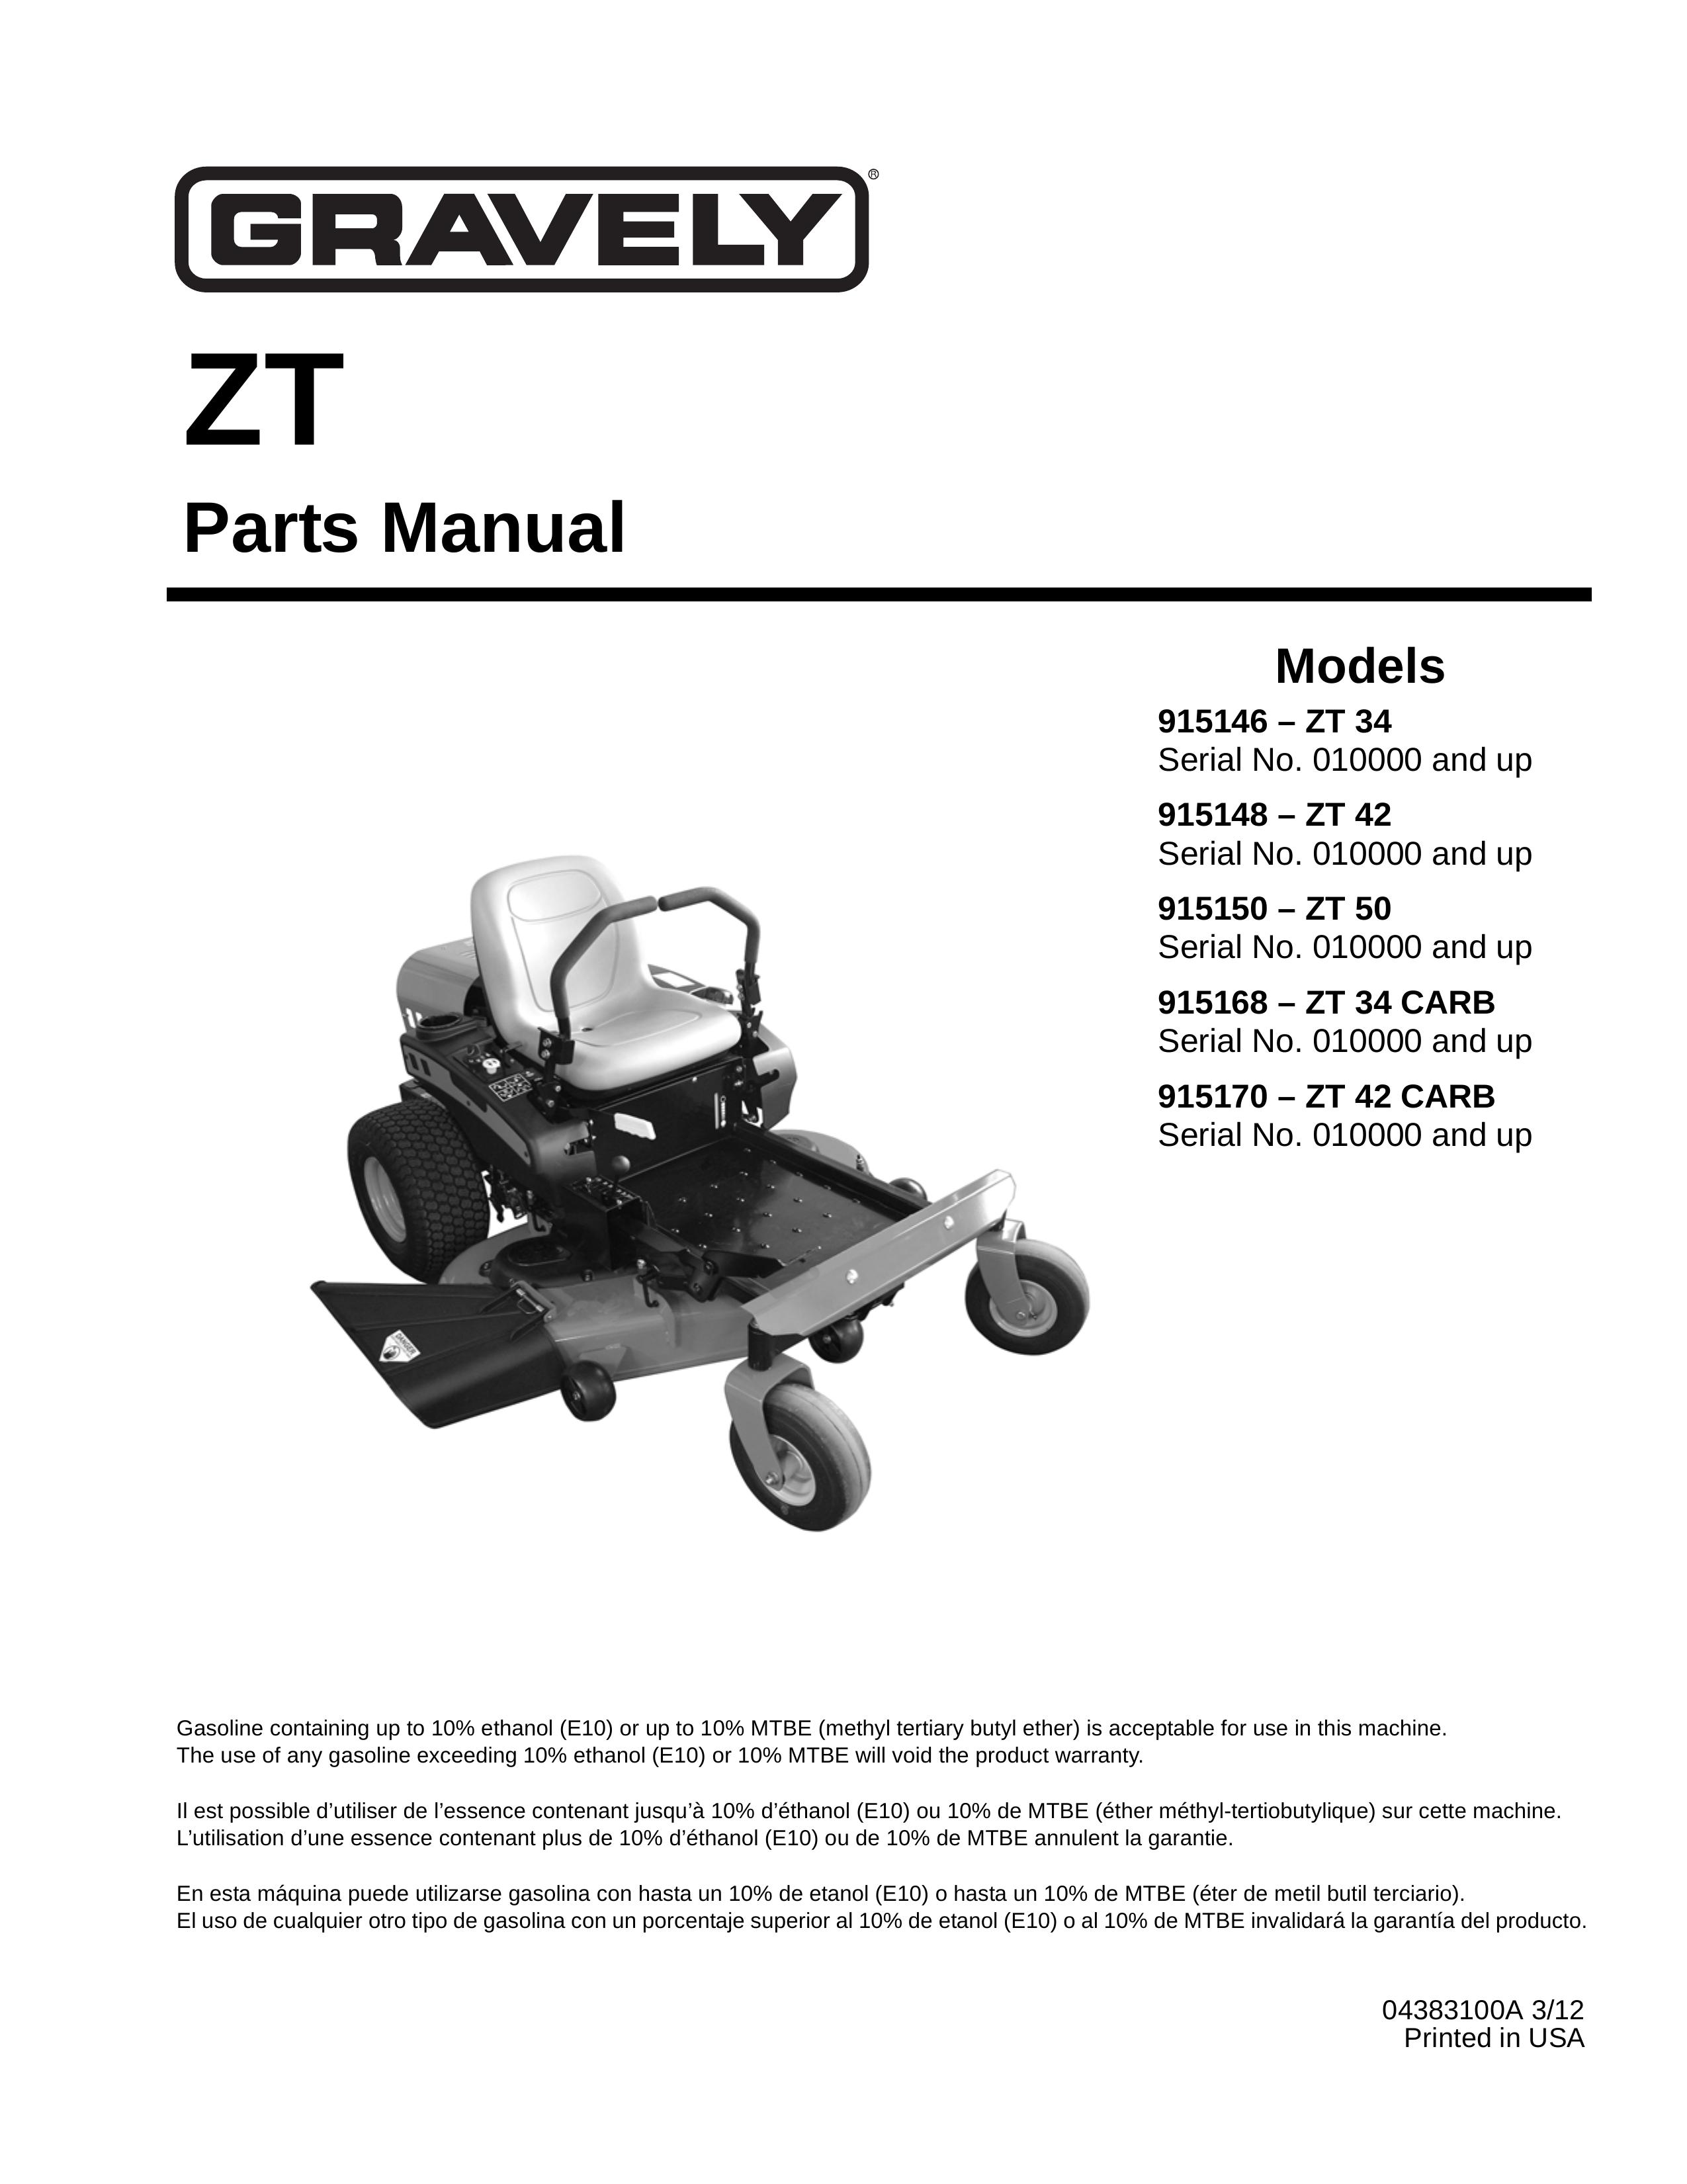 Gravely 915168 - ZT34 CARB Lawn Mower User Manual